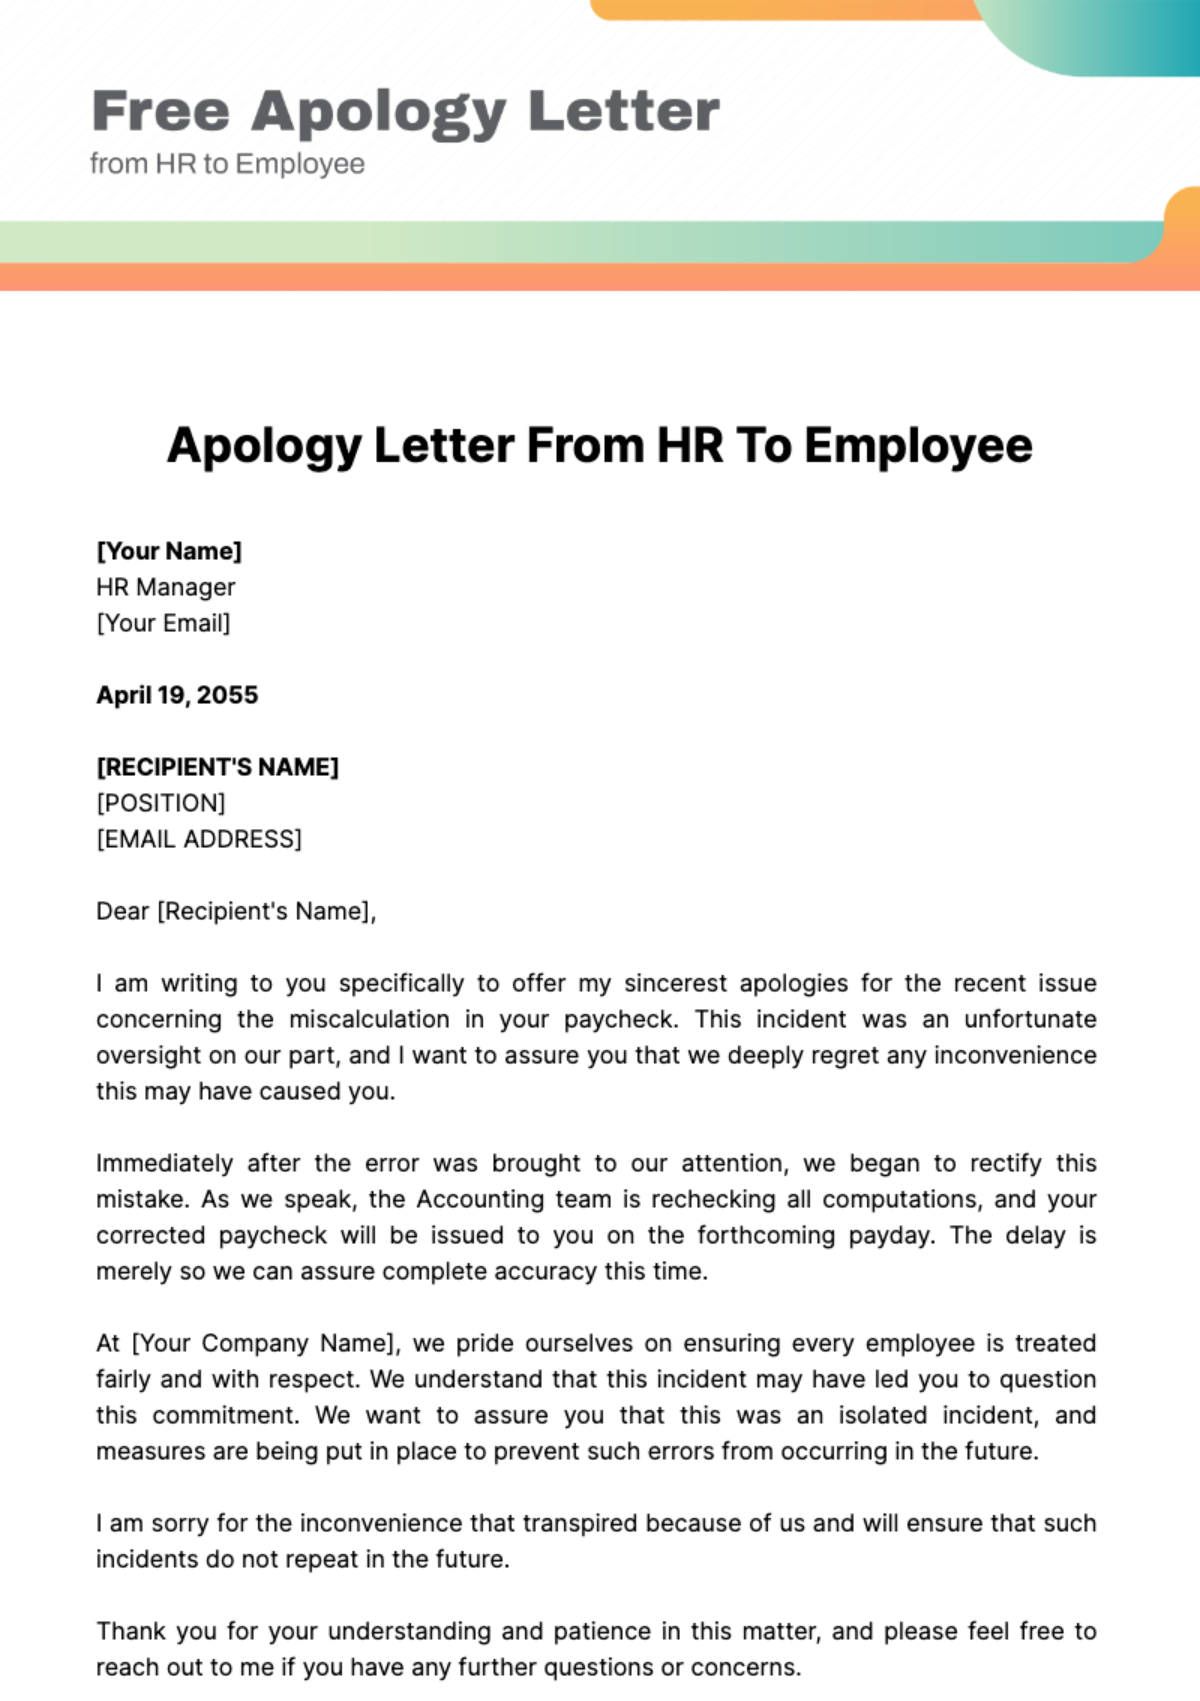 Free Apology Letter from HR to Employee Template